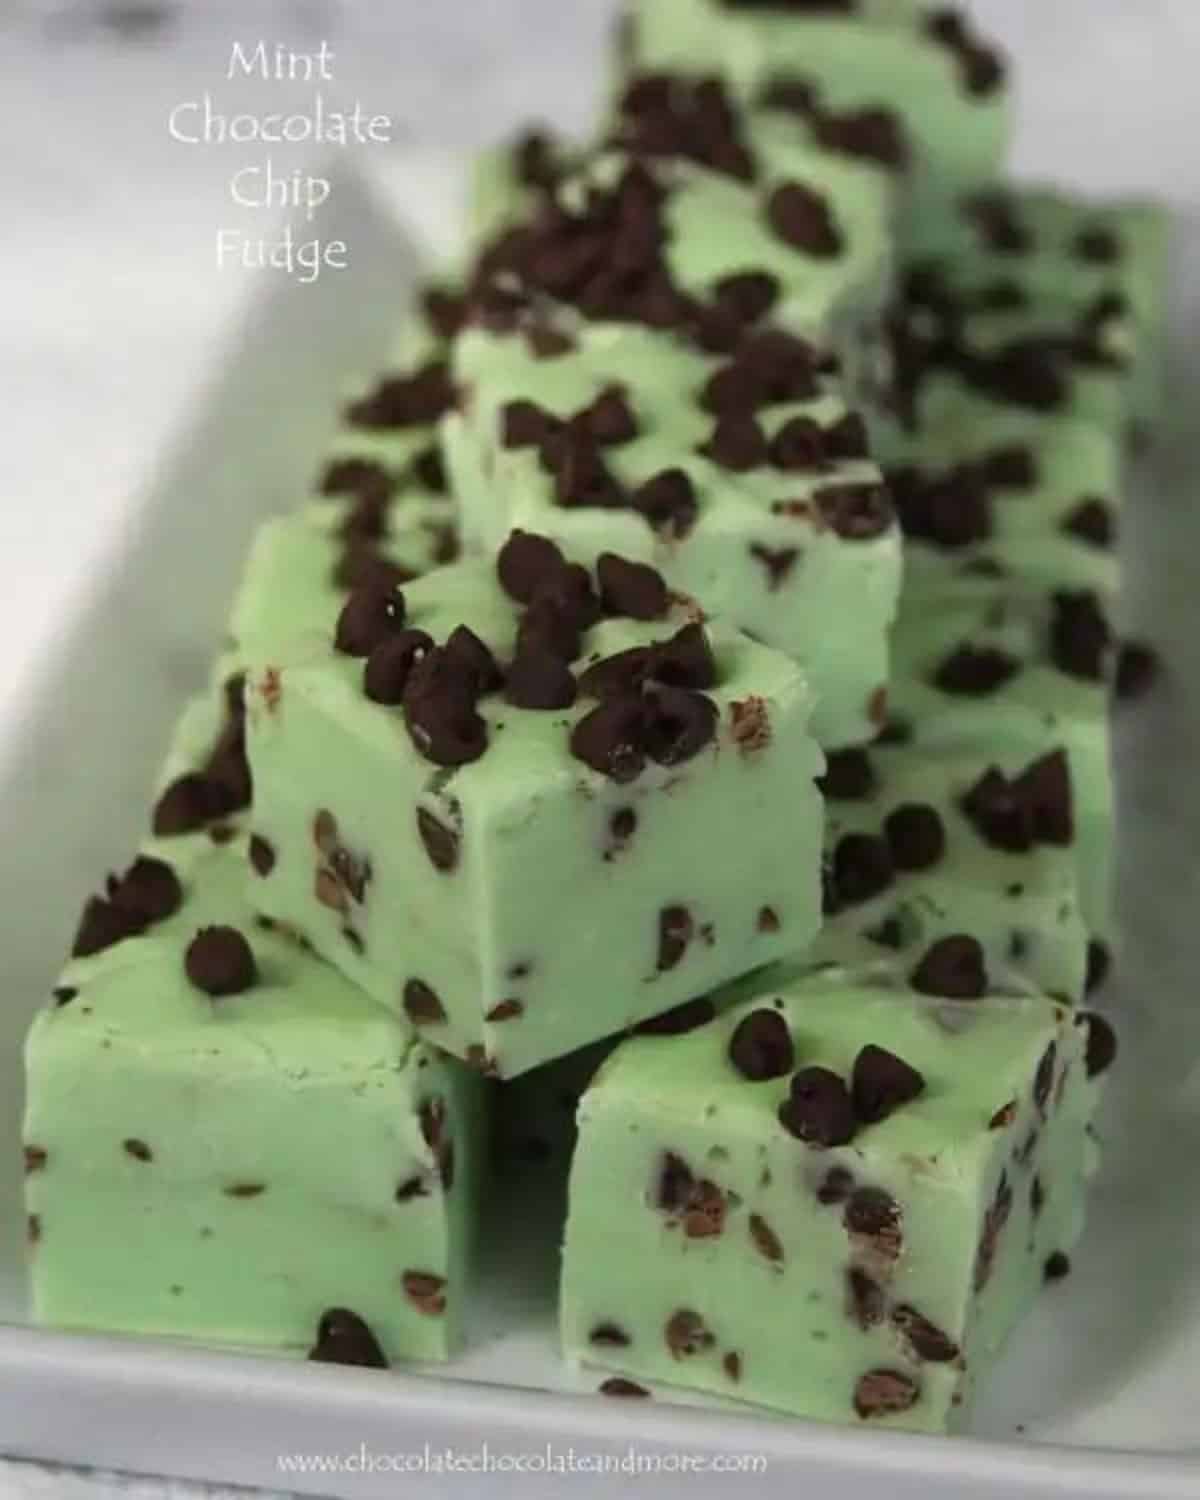 A stack of green fudge with chocolate chips along with the text Mint Chocolate Chip Fudge.